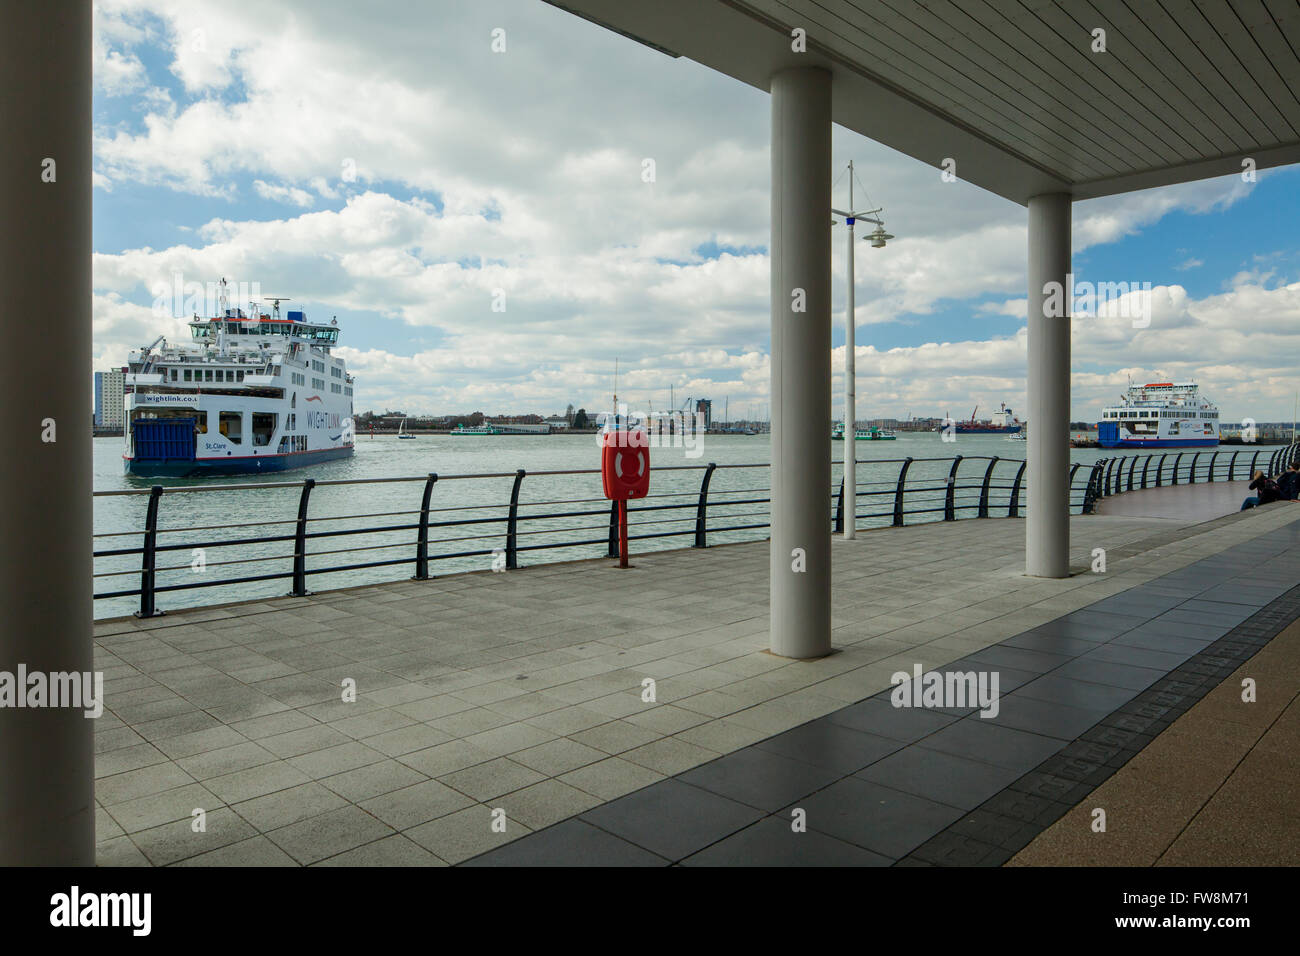 Wightlink ferry entering Portsmouth Harbour, England. Stock Photo